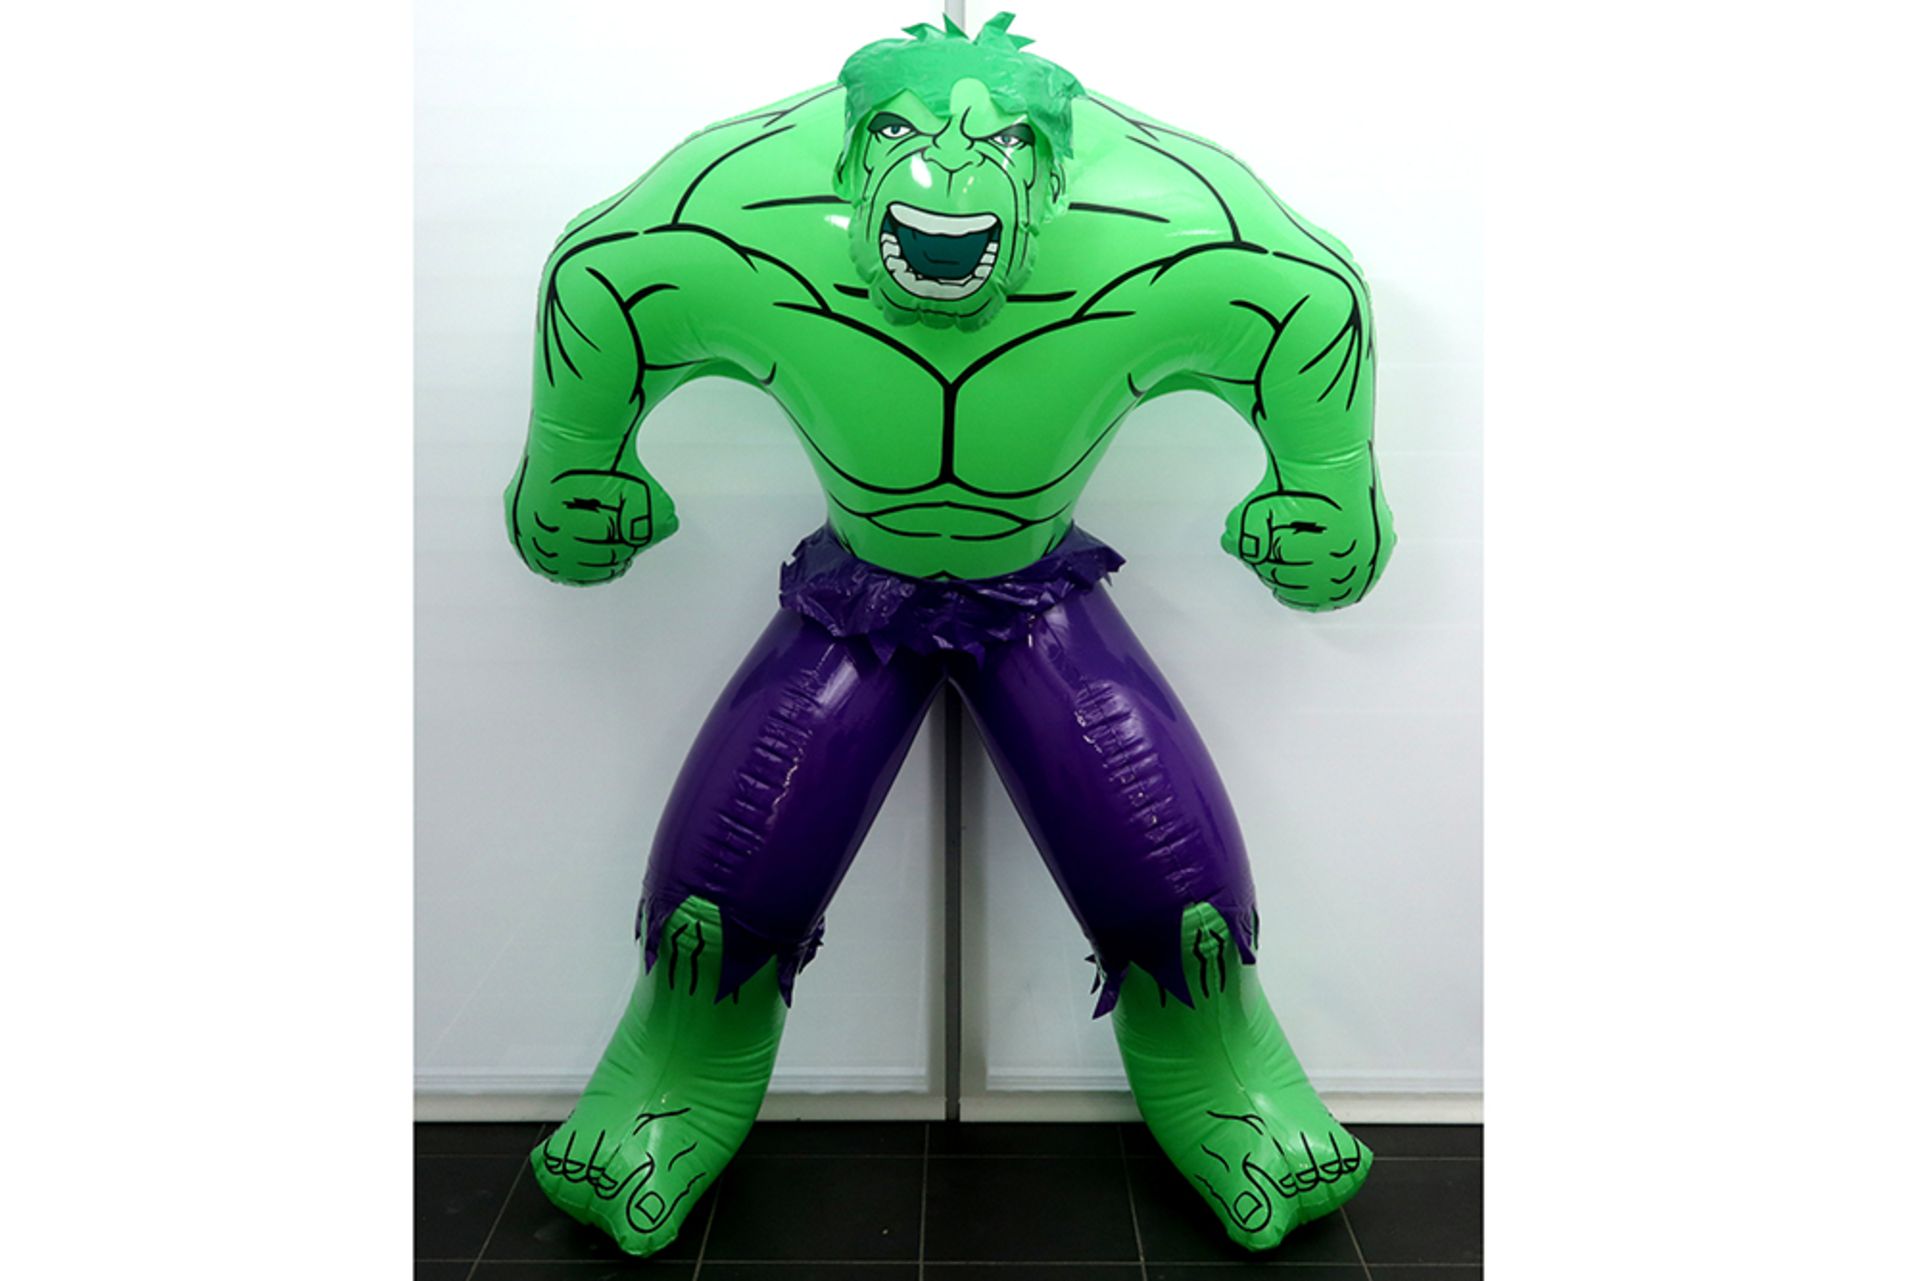 eff Koons "The Hulk" (inflatable) plastic sculpture - edition by Marvel dd 2003 these sculptures - Image 2 of 5